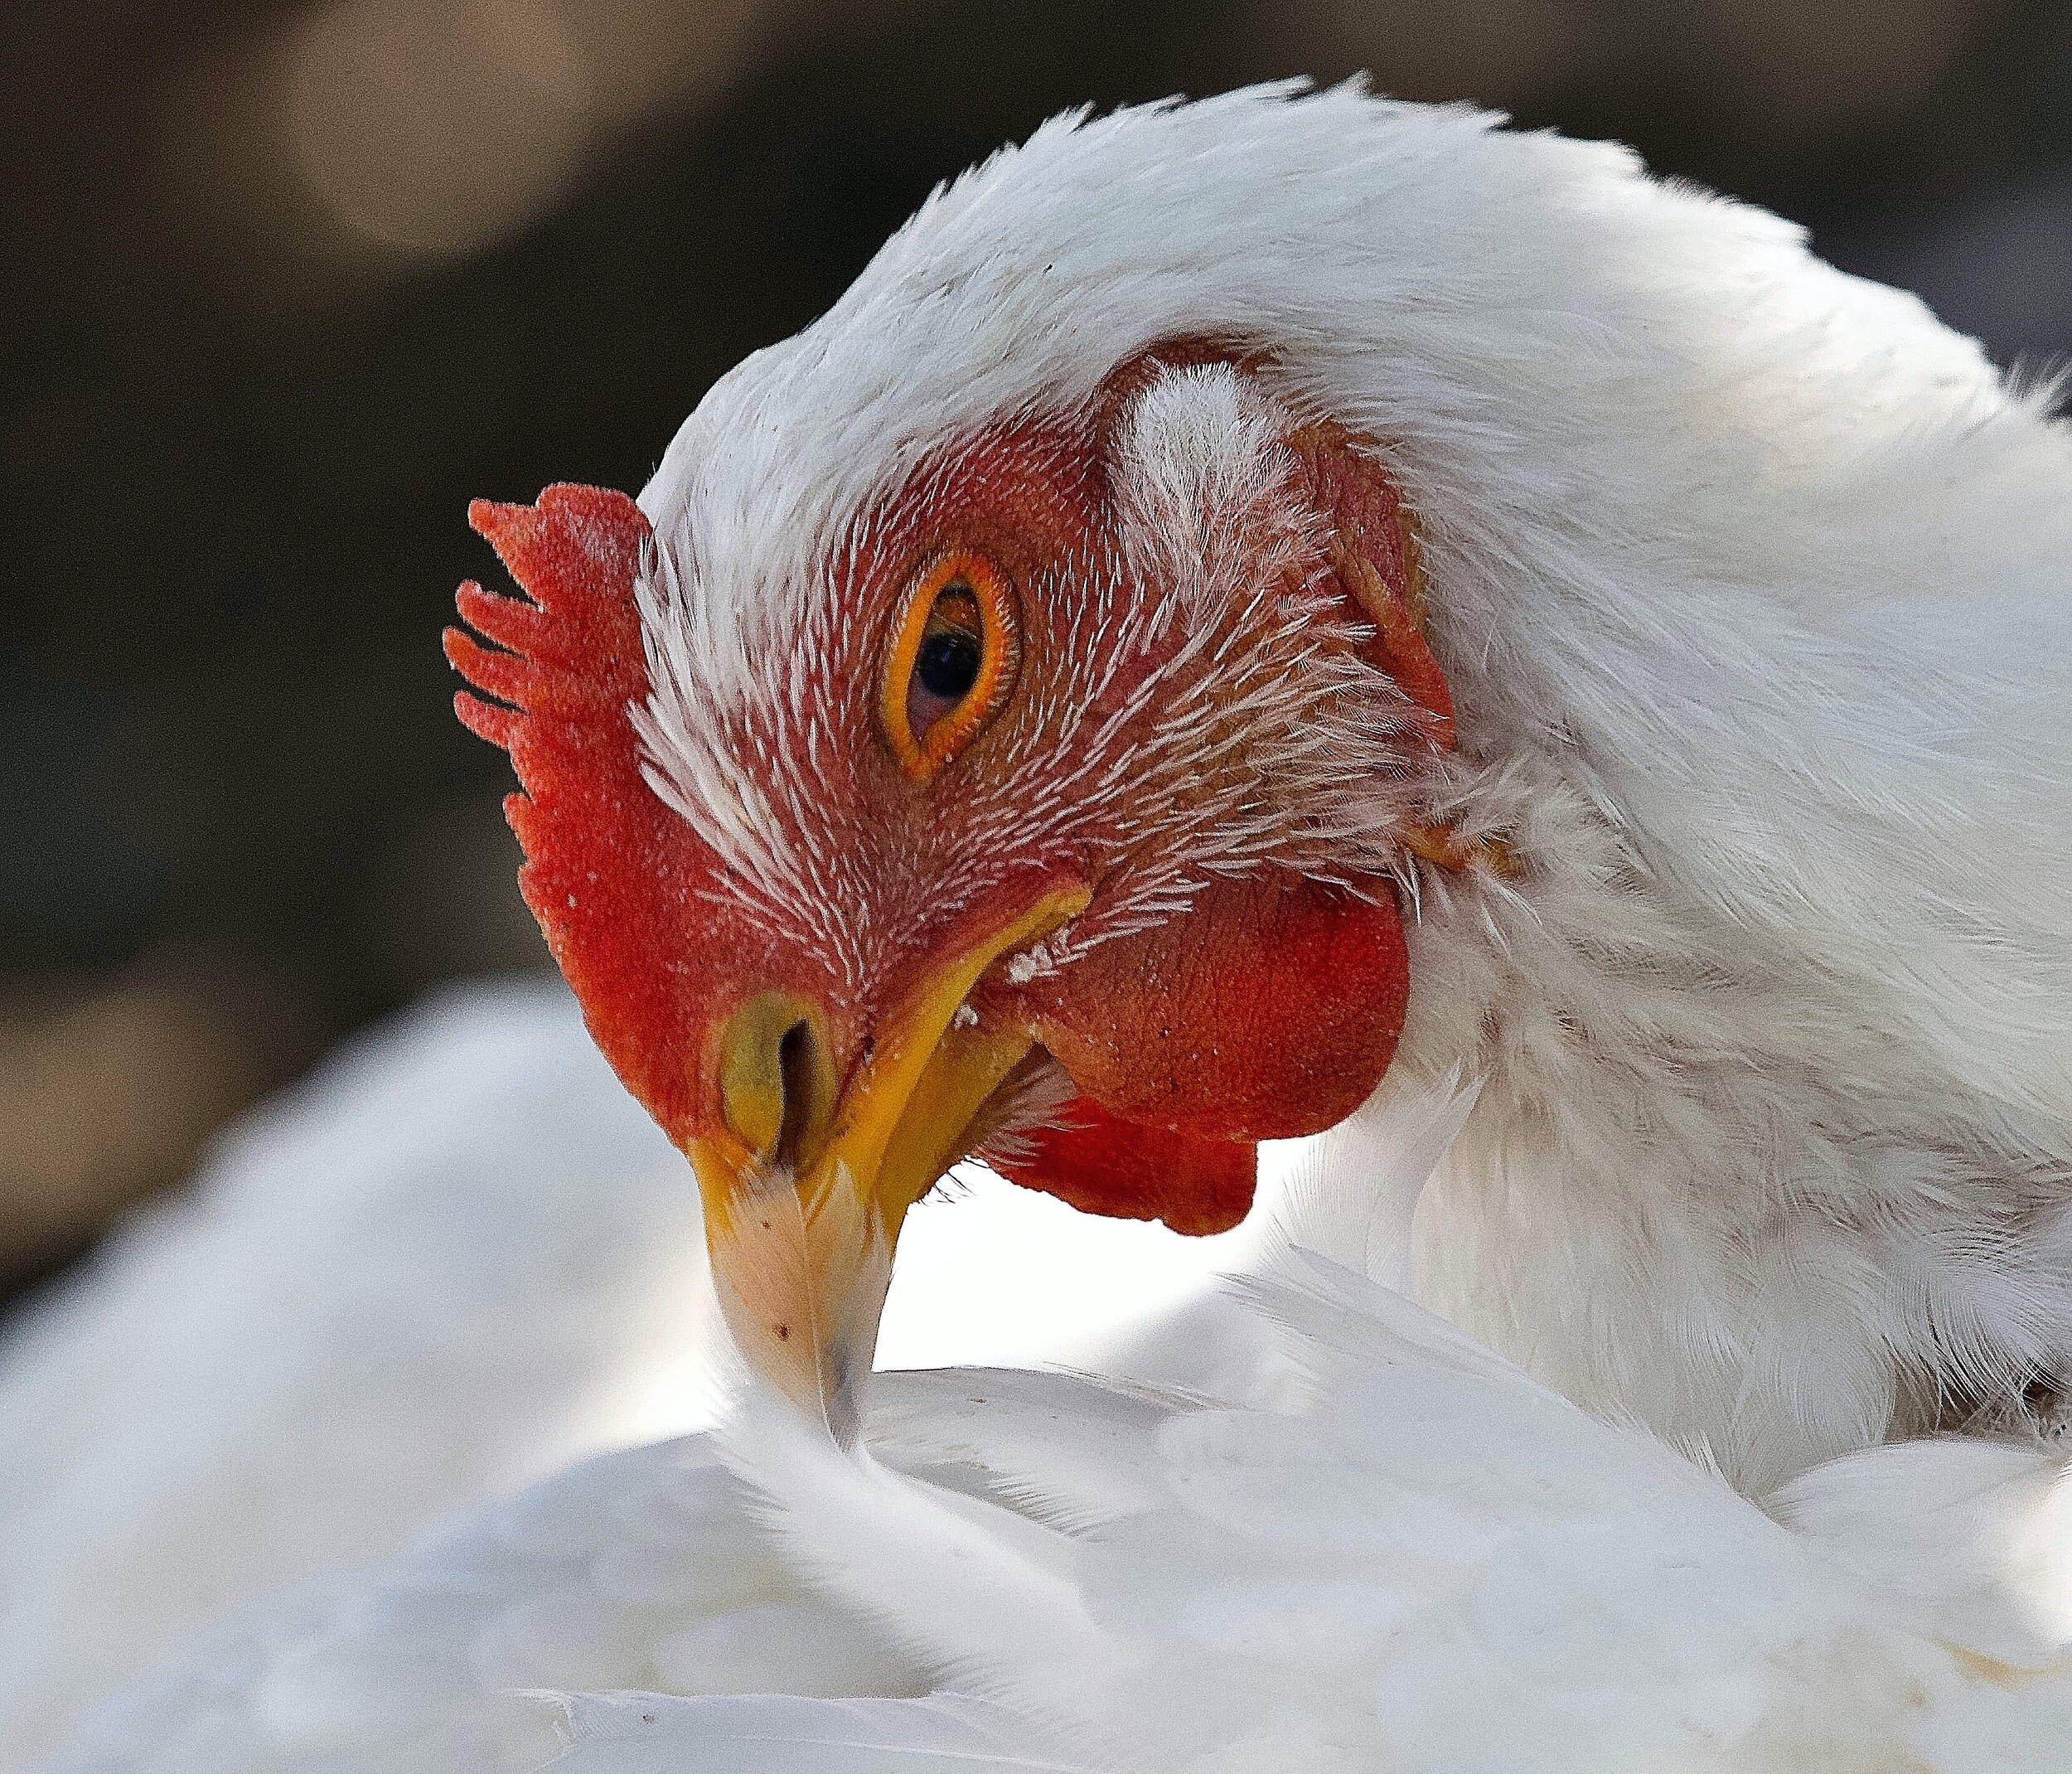 how many humans are killed by chickens each year